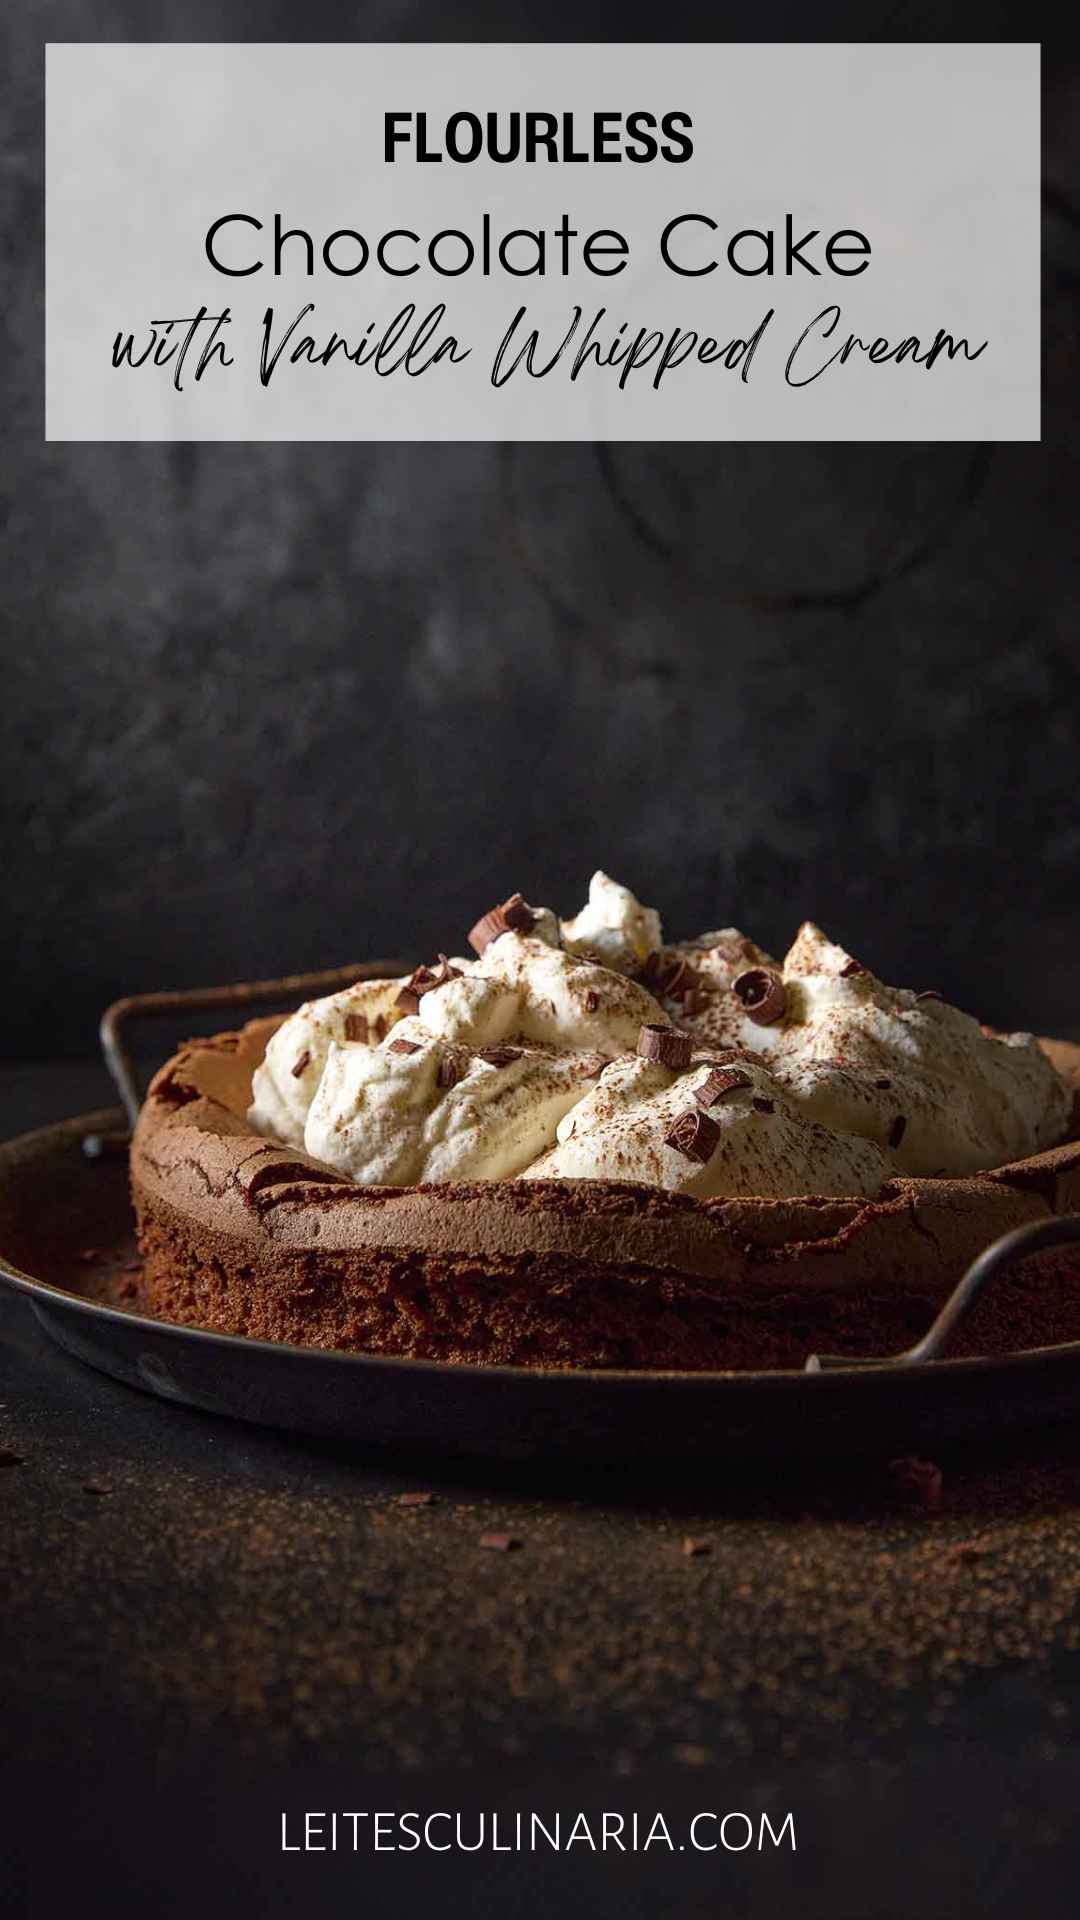 A flourless chocolate cloud cake topped with billows of whipped cream on a metal platter.